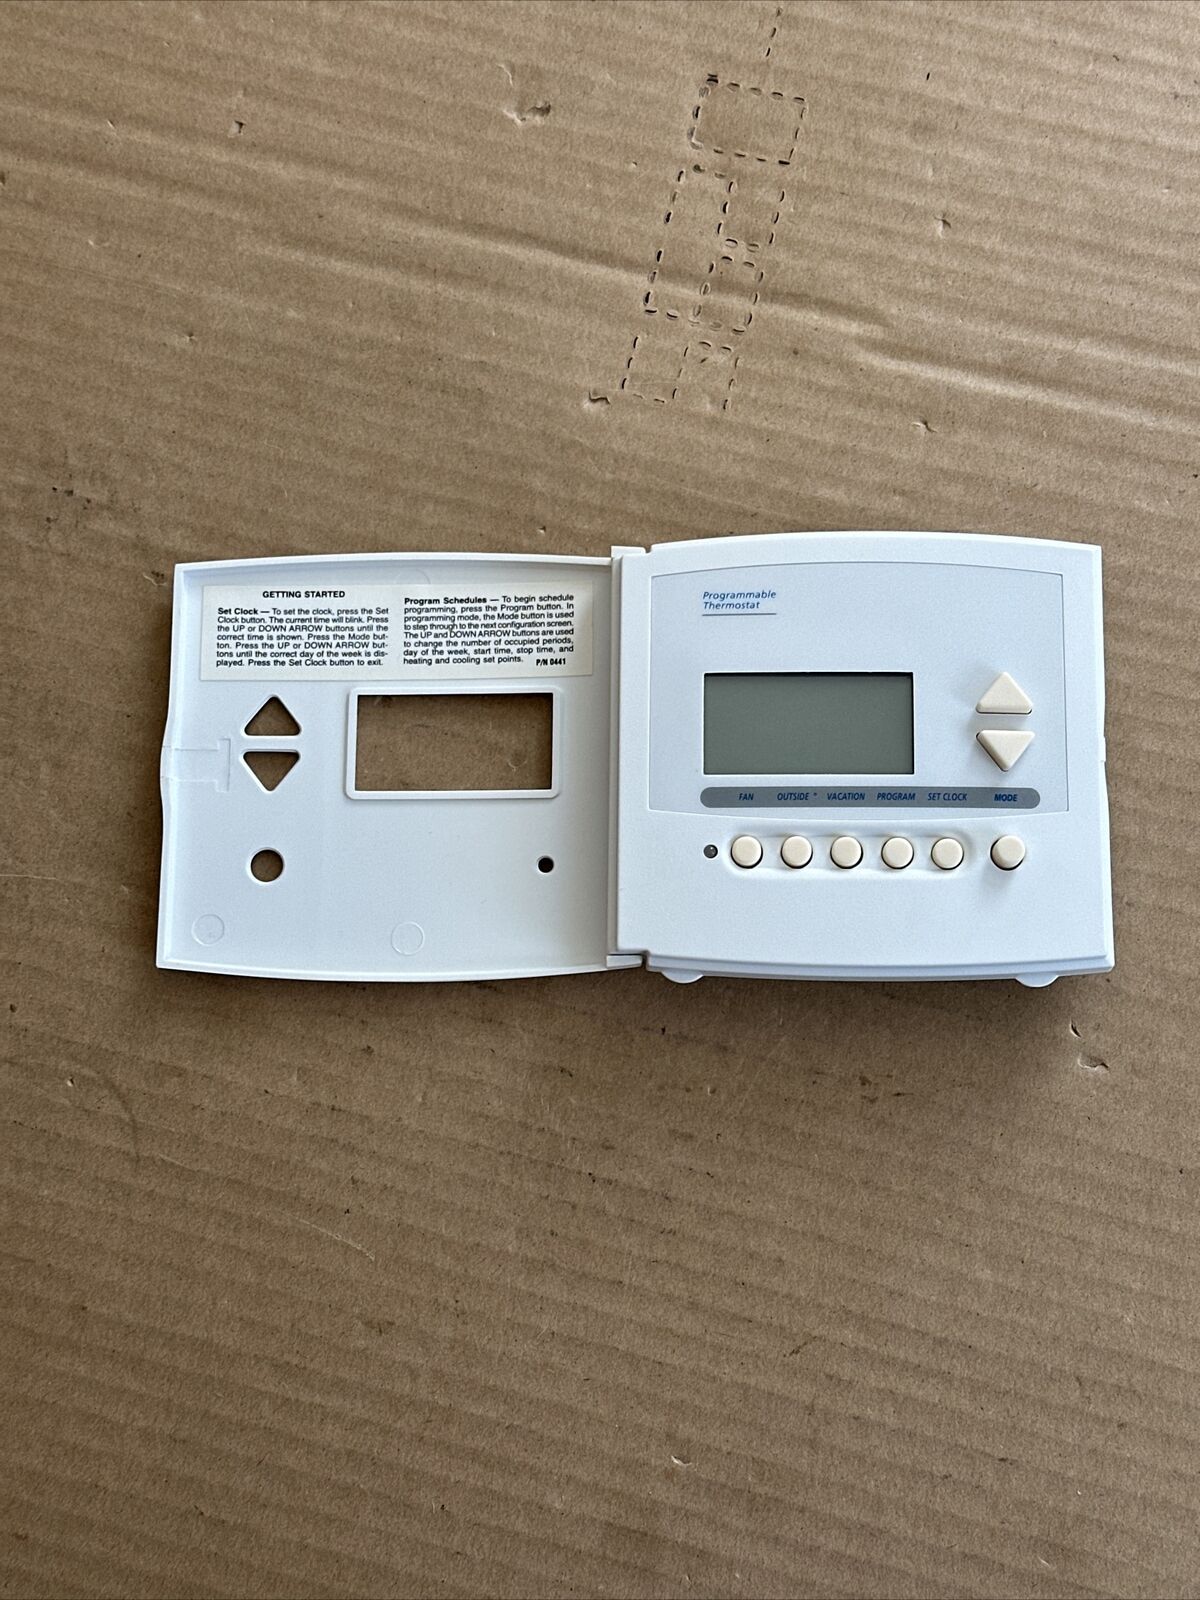 Totaline P374-1100 Programmable Thermostat 2 Heat 2 Cool Large Numbers Backlit